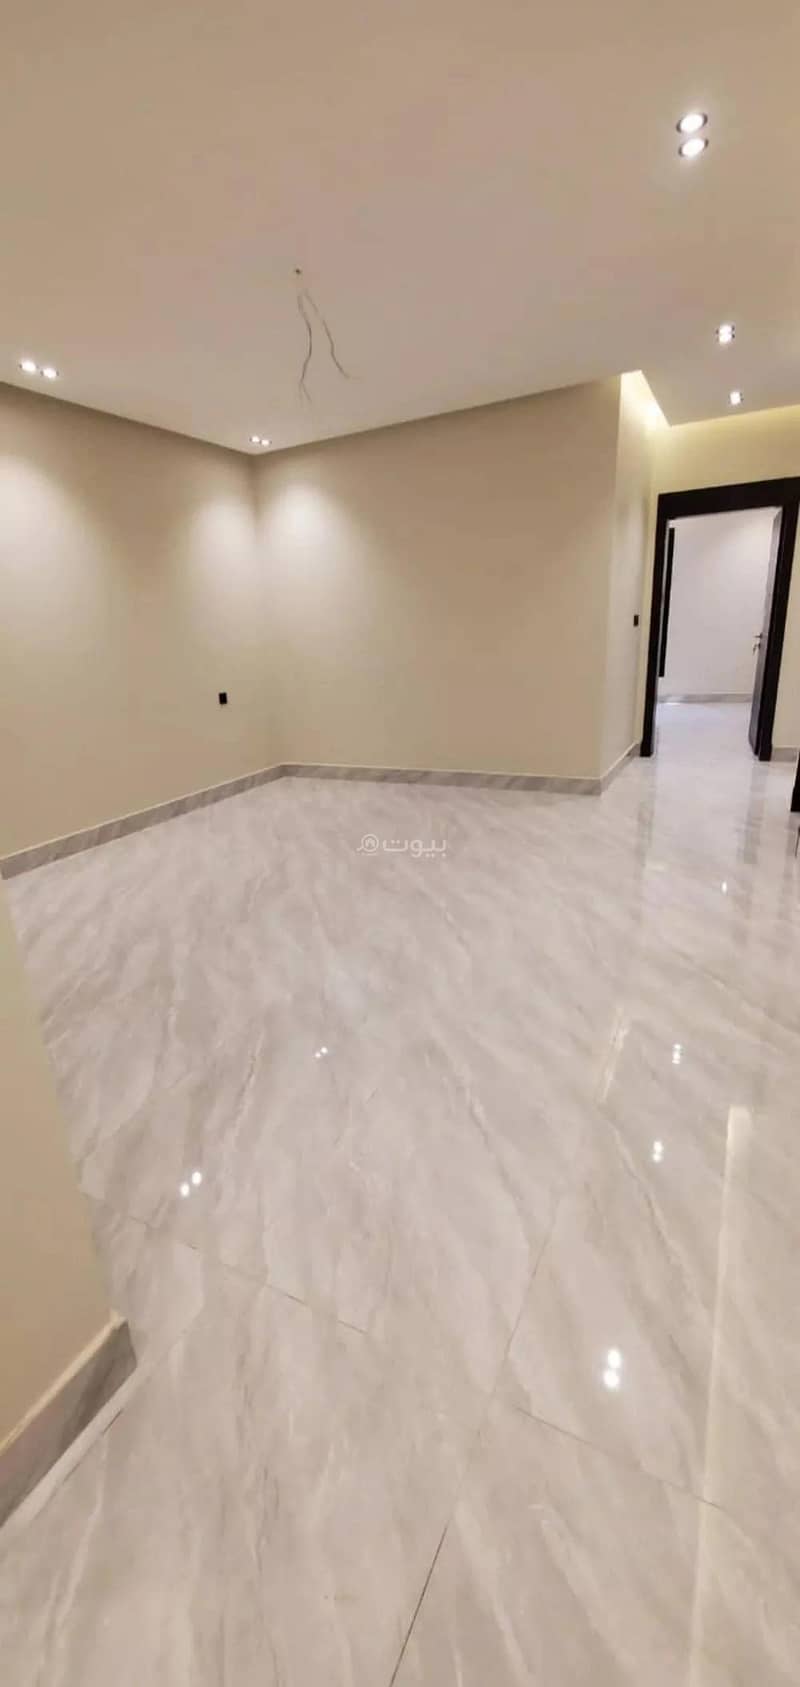 3 Room Apartment For Rent in Al Yaqout, Jeddah